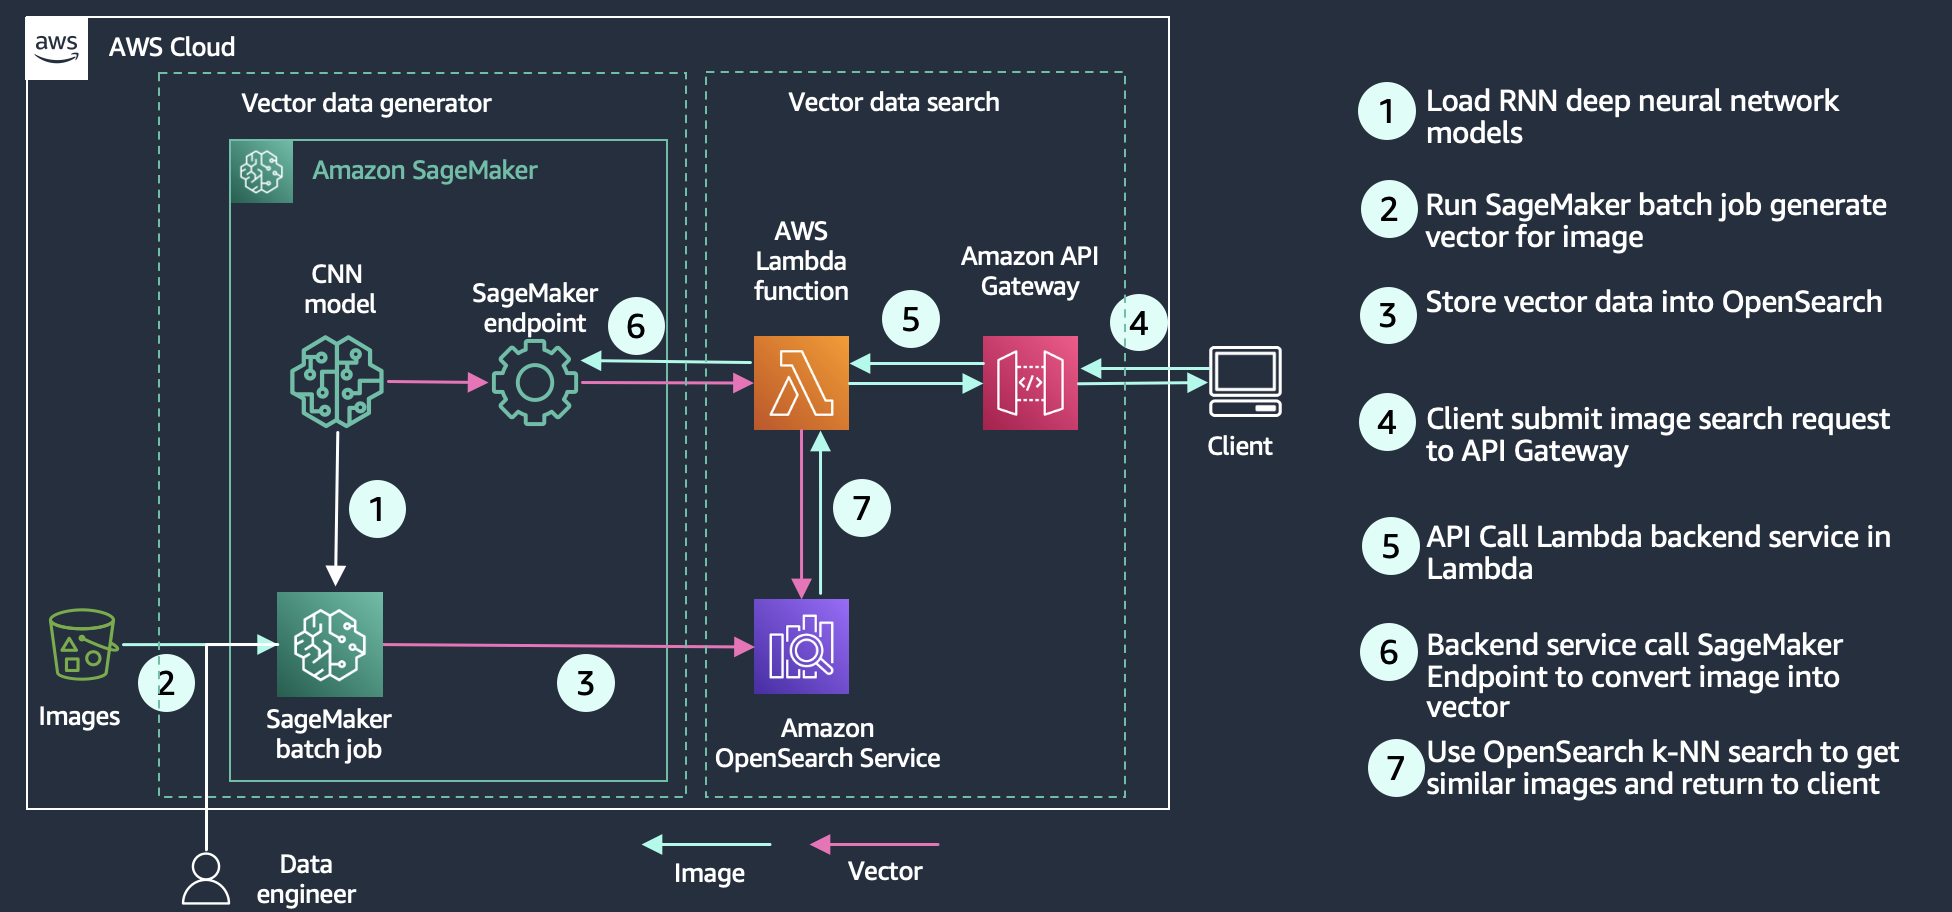 Architecture diagram showing how to use Amazon OpenSearch Service to search rich media like images, videos, and audio files